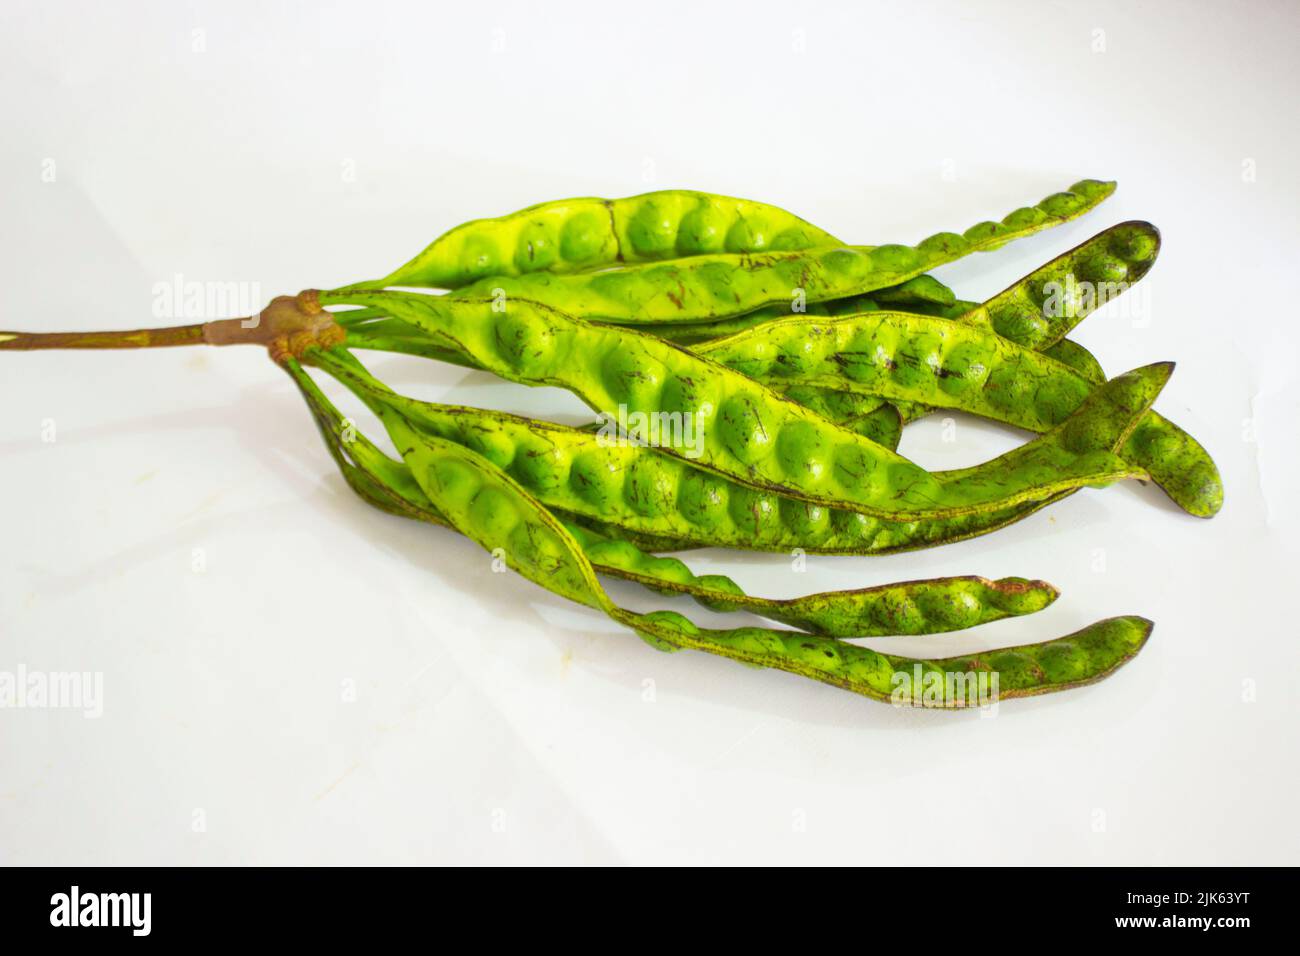 Petai, Twisted cluster bean, Stink bean, Bitter Bean, Parkia speciosa seeds, isolated on white background Stock Photo